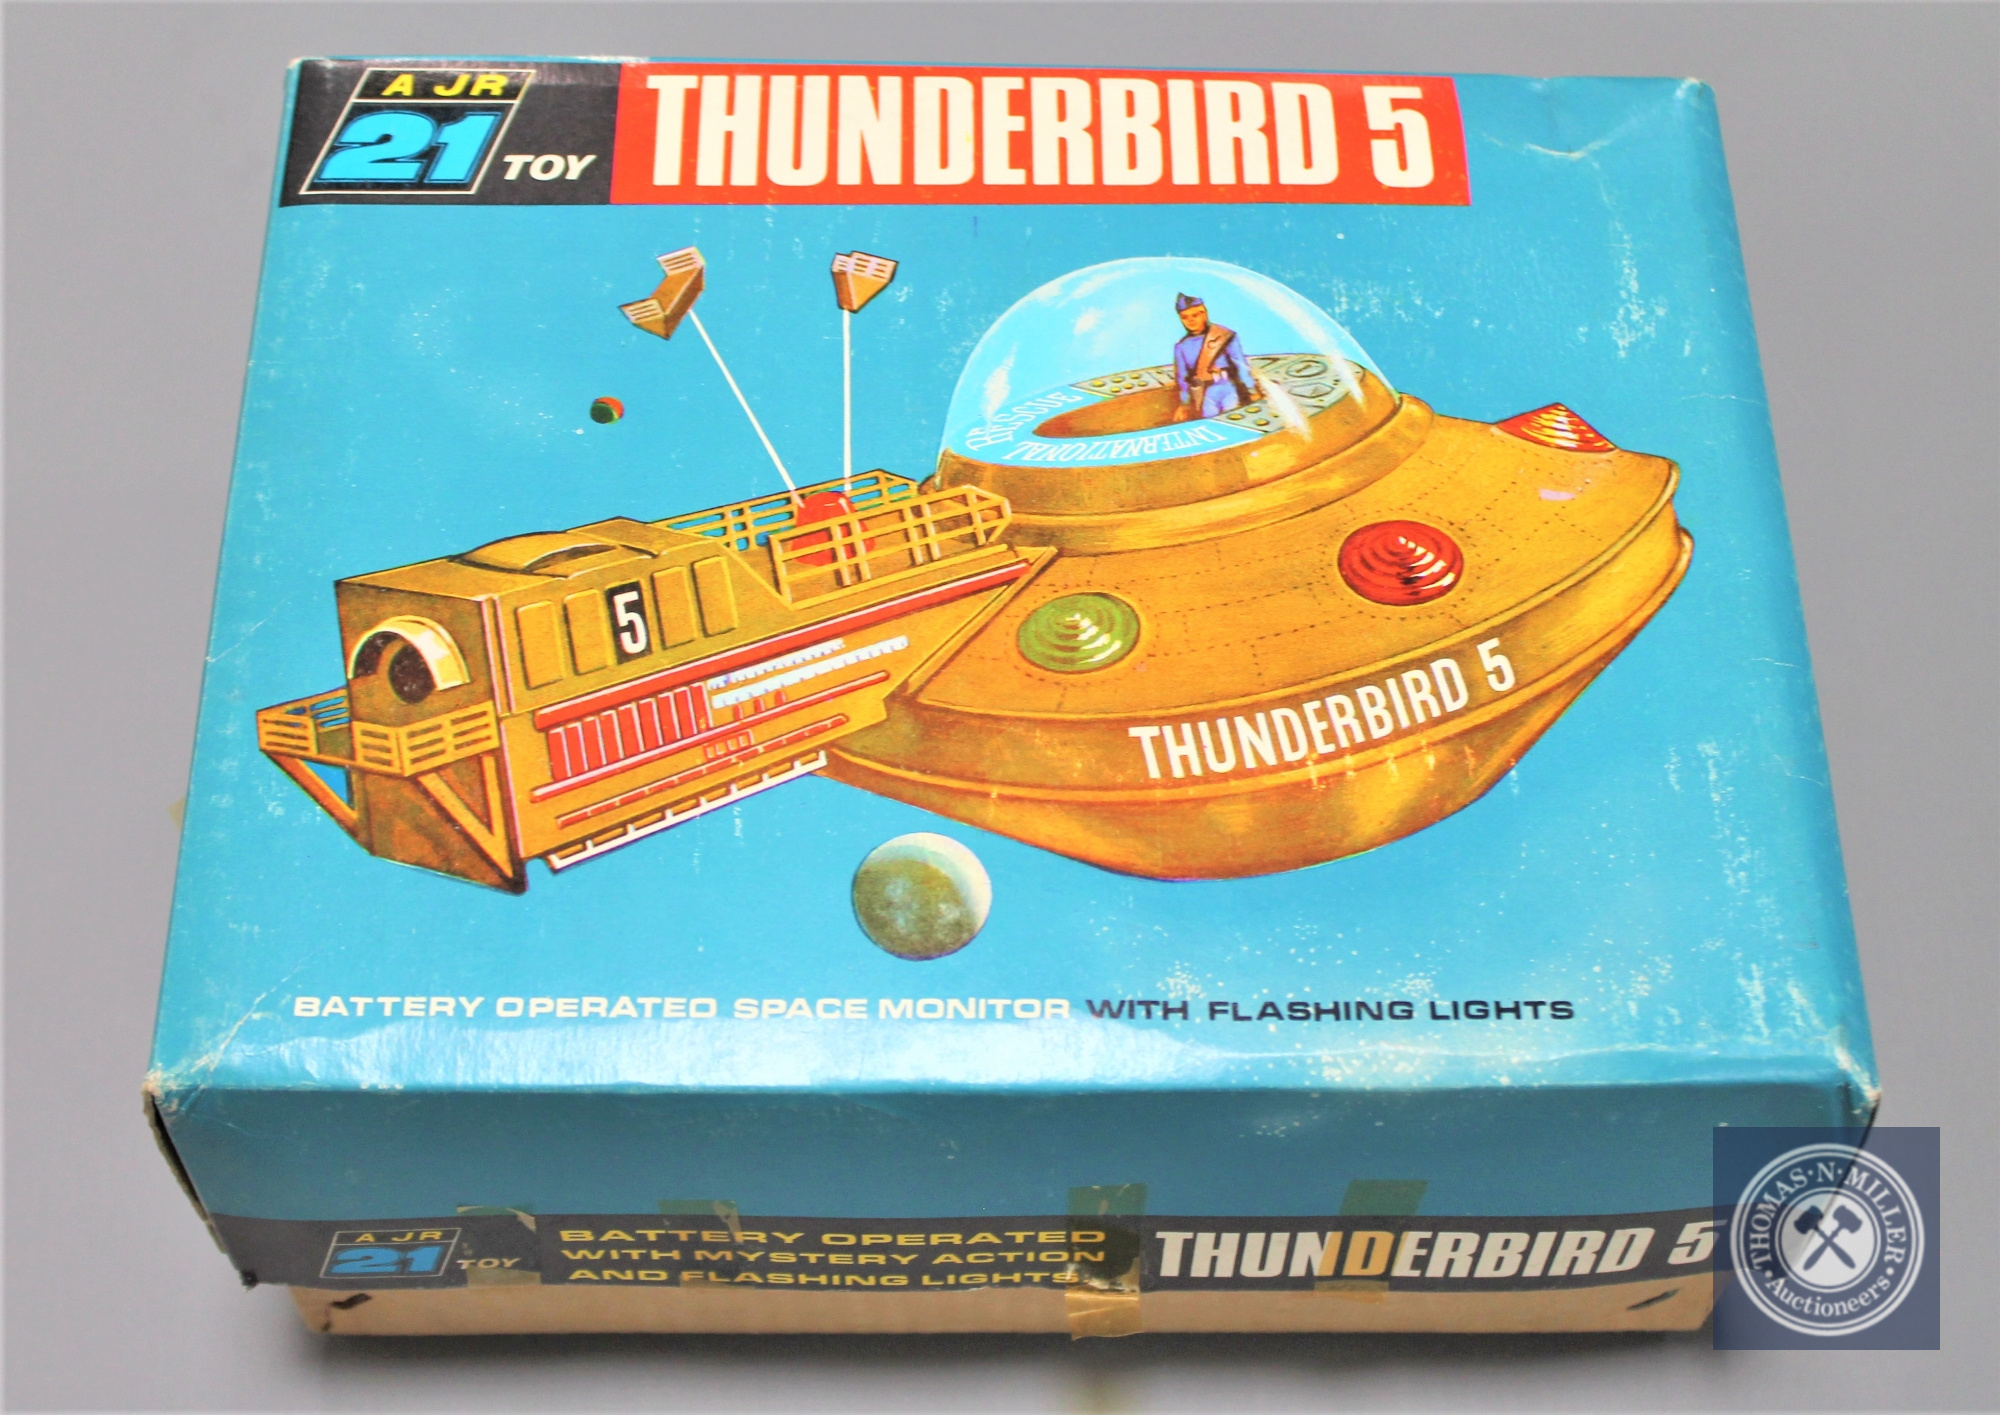 A J Rosenthal (Toys) Limited 21 Toy Thunderbird 5, battery operated with flashing lights,